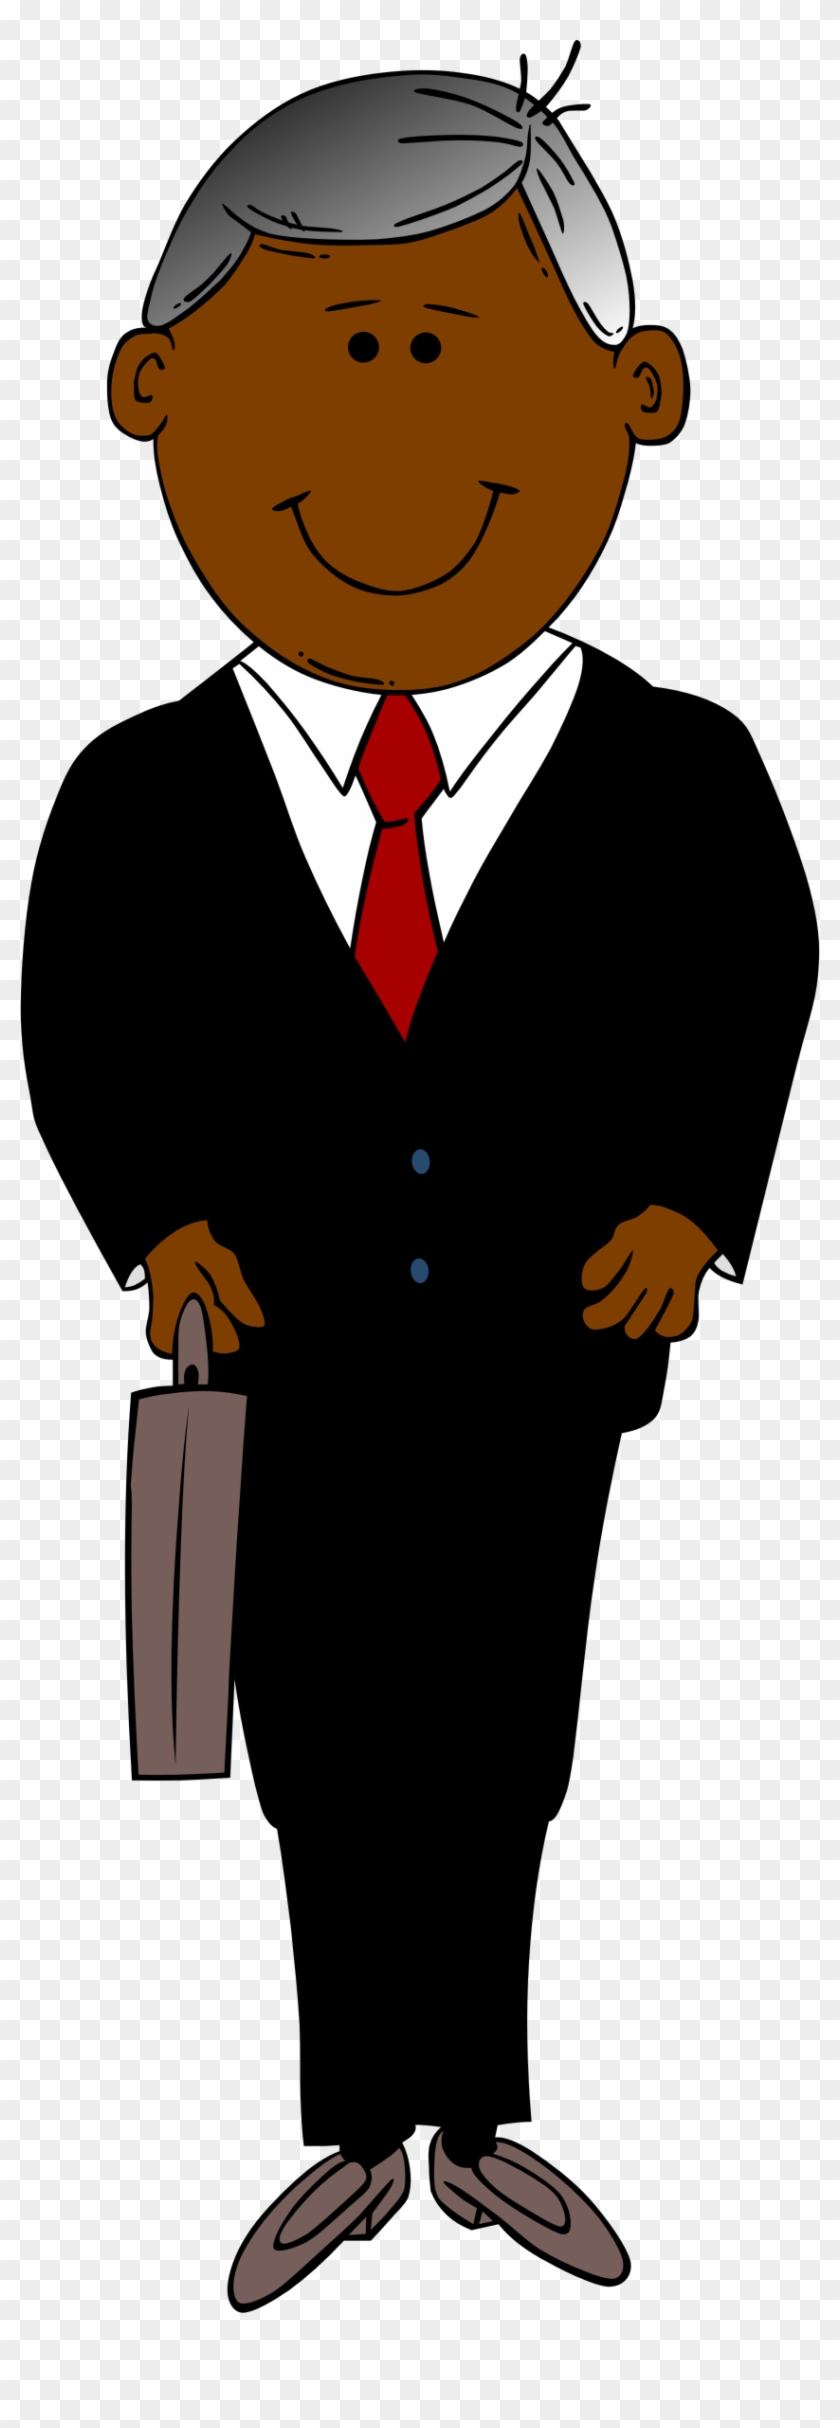 Man In A Suit, Material, Man, Man In A Suit Free PNG And Clipart Image For  Free Download - Lovepik | 401227379